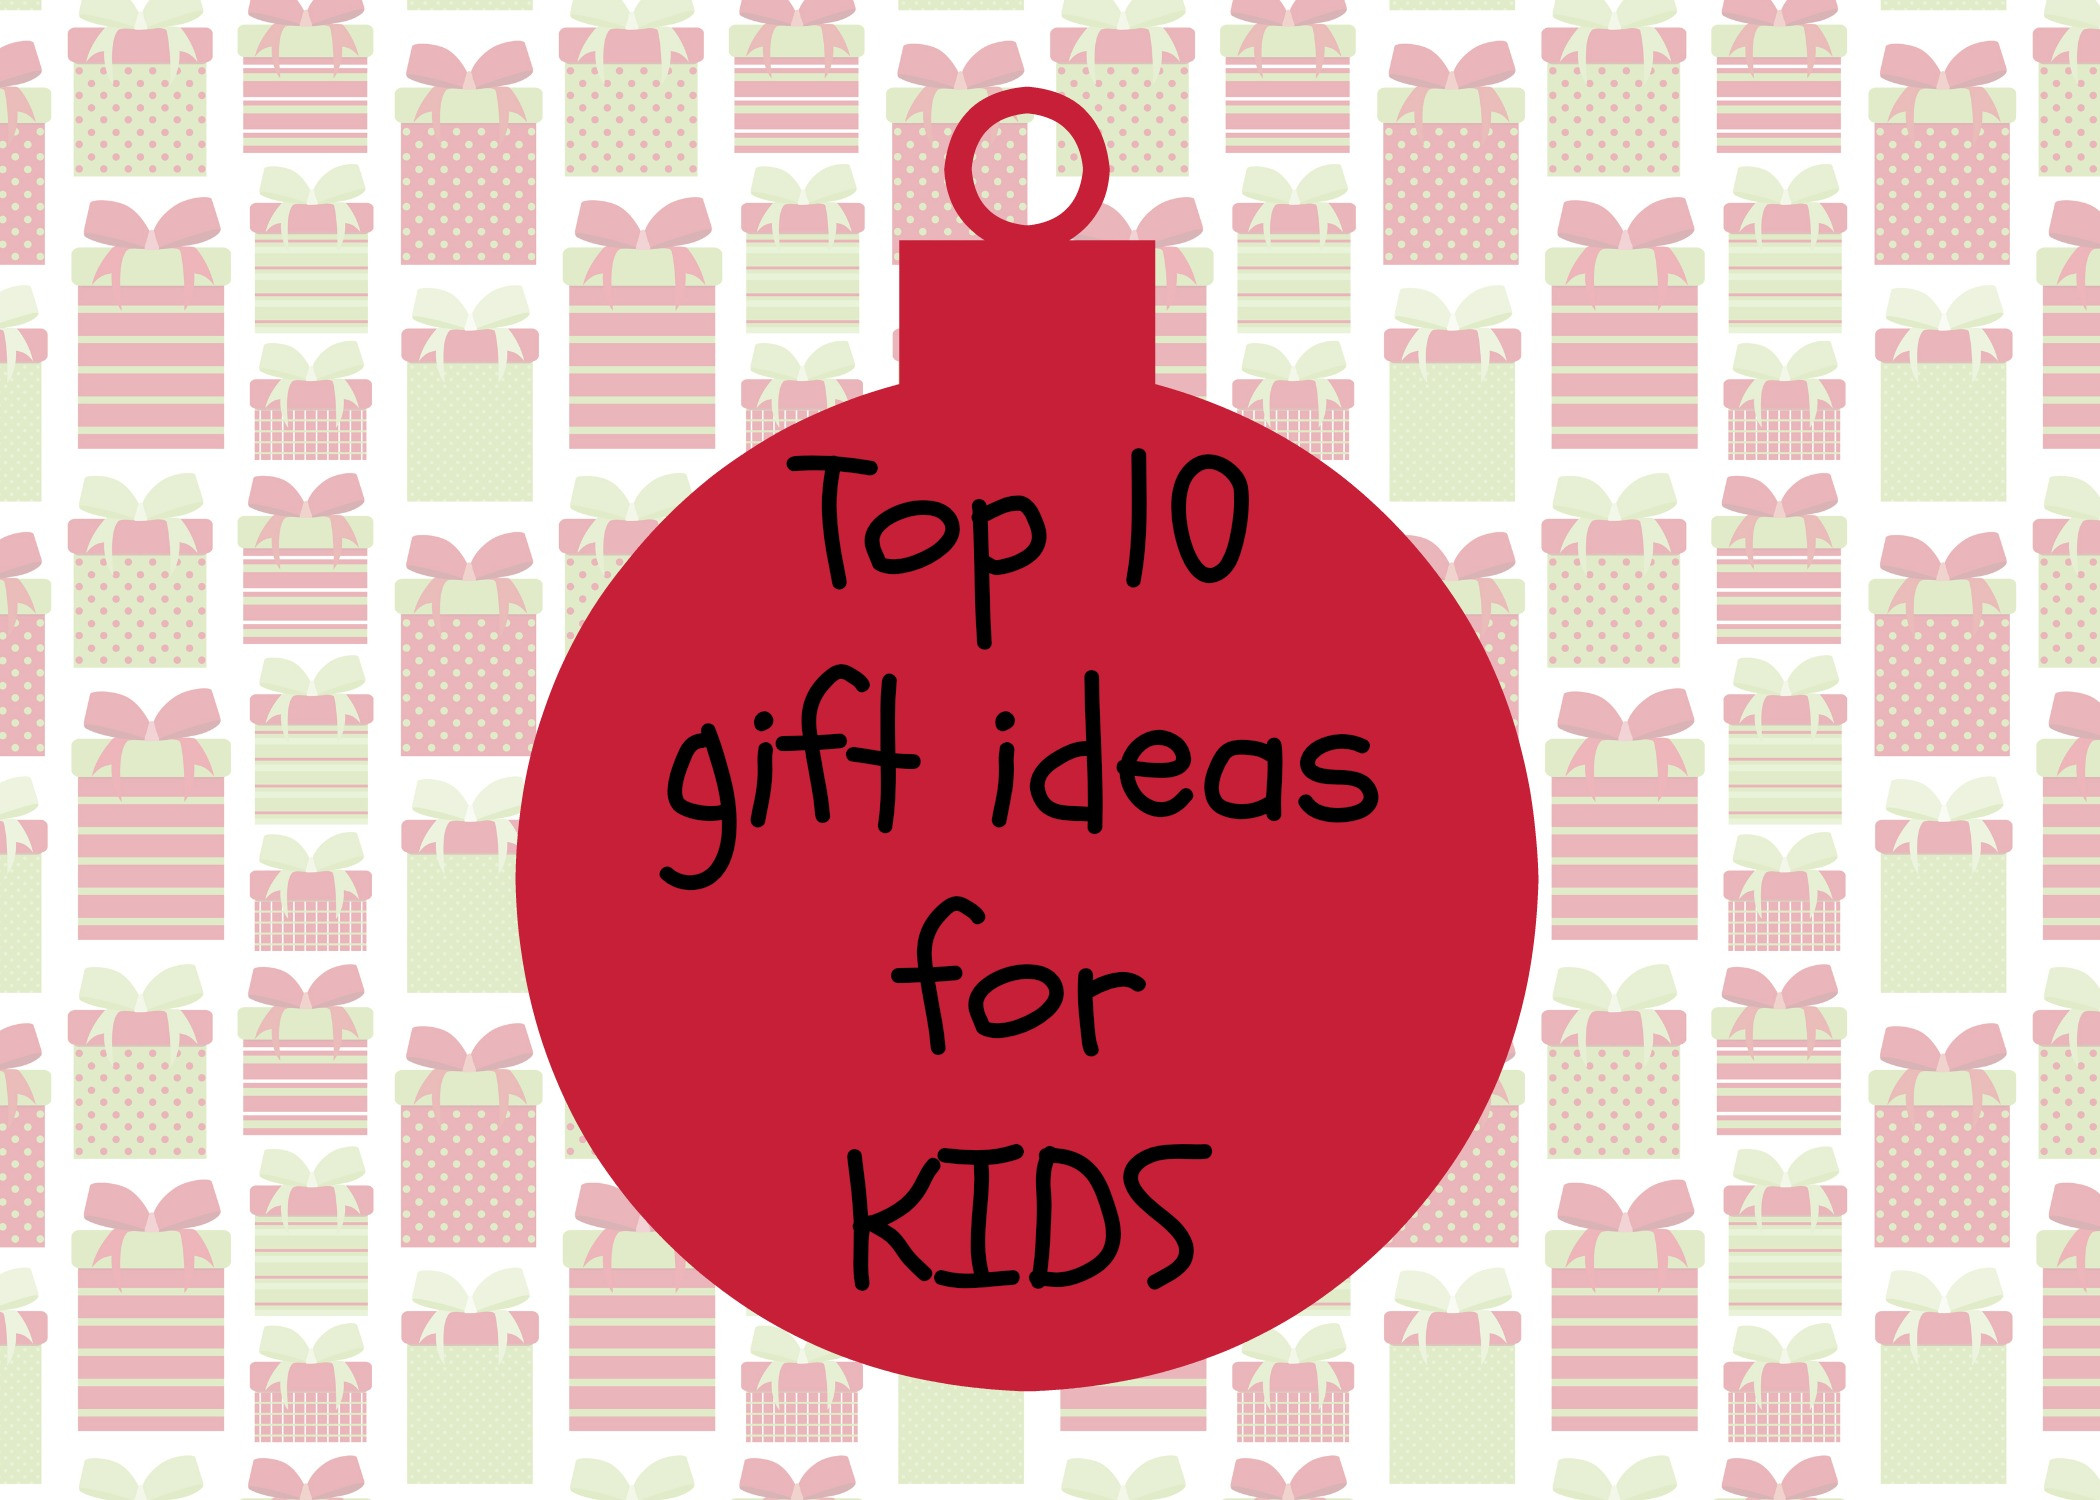 Great Christmas Gift Ideas
 Top 5 Christmas t ideas brought to you by Crazysales